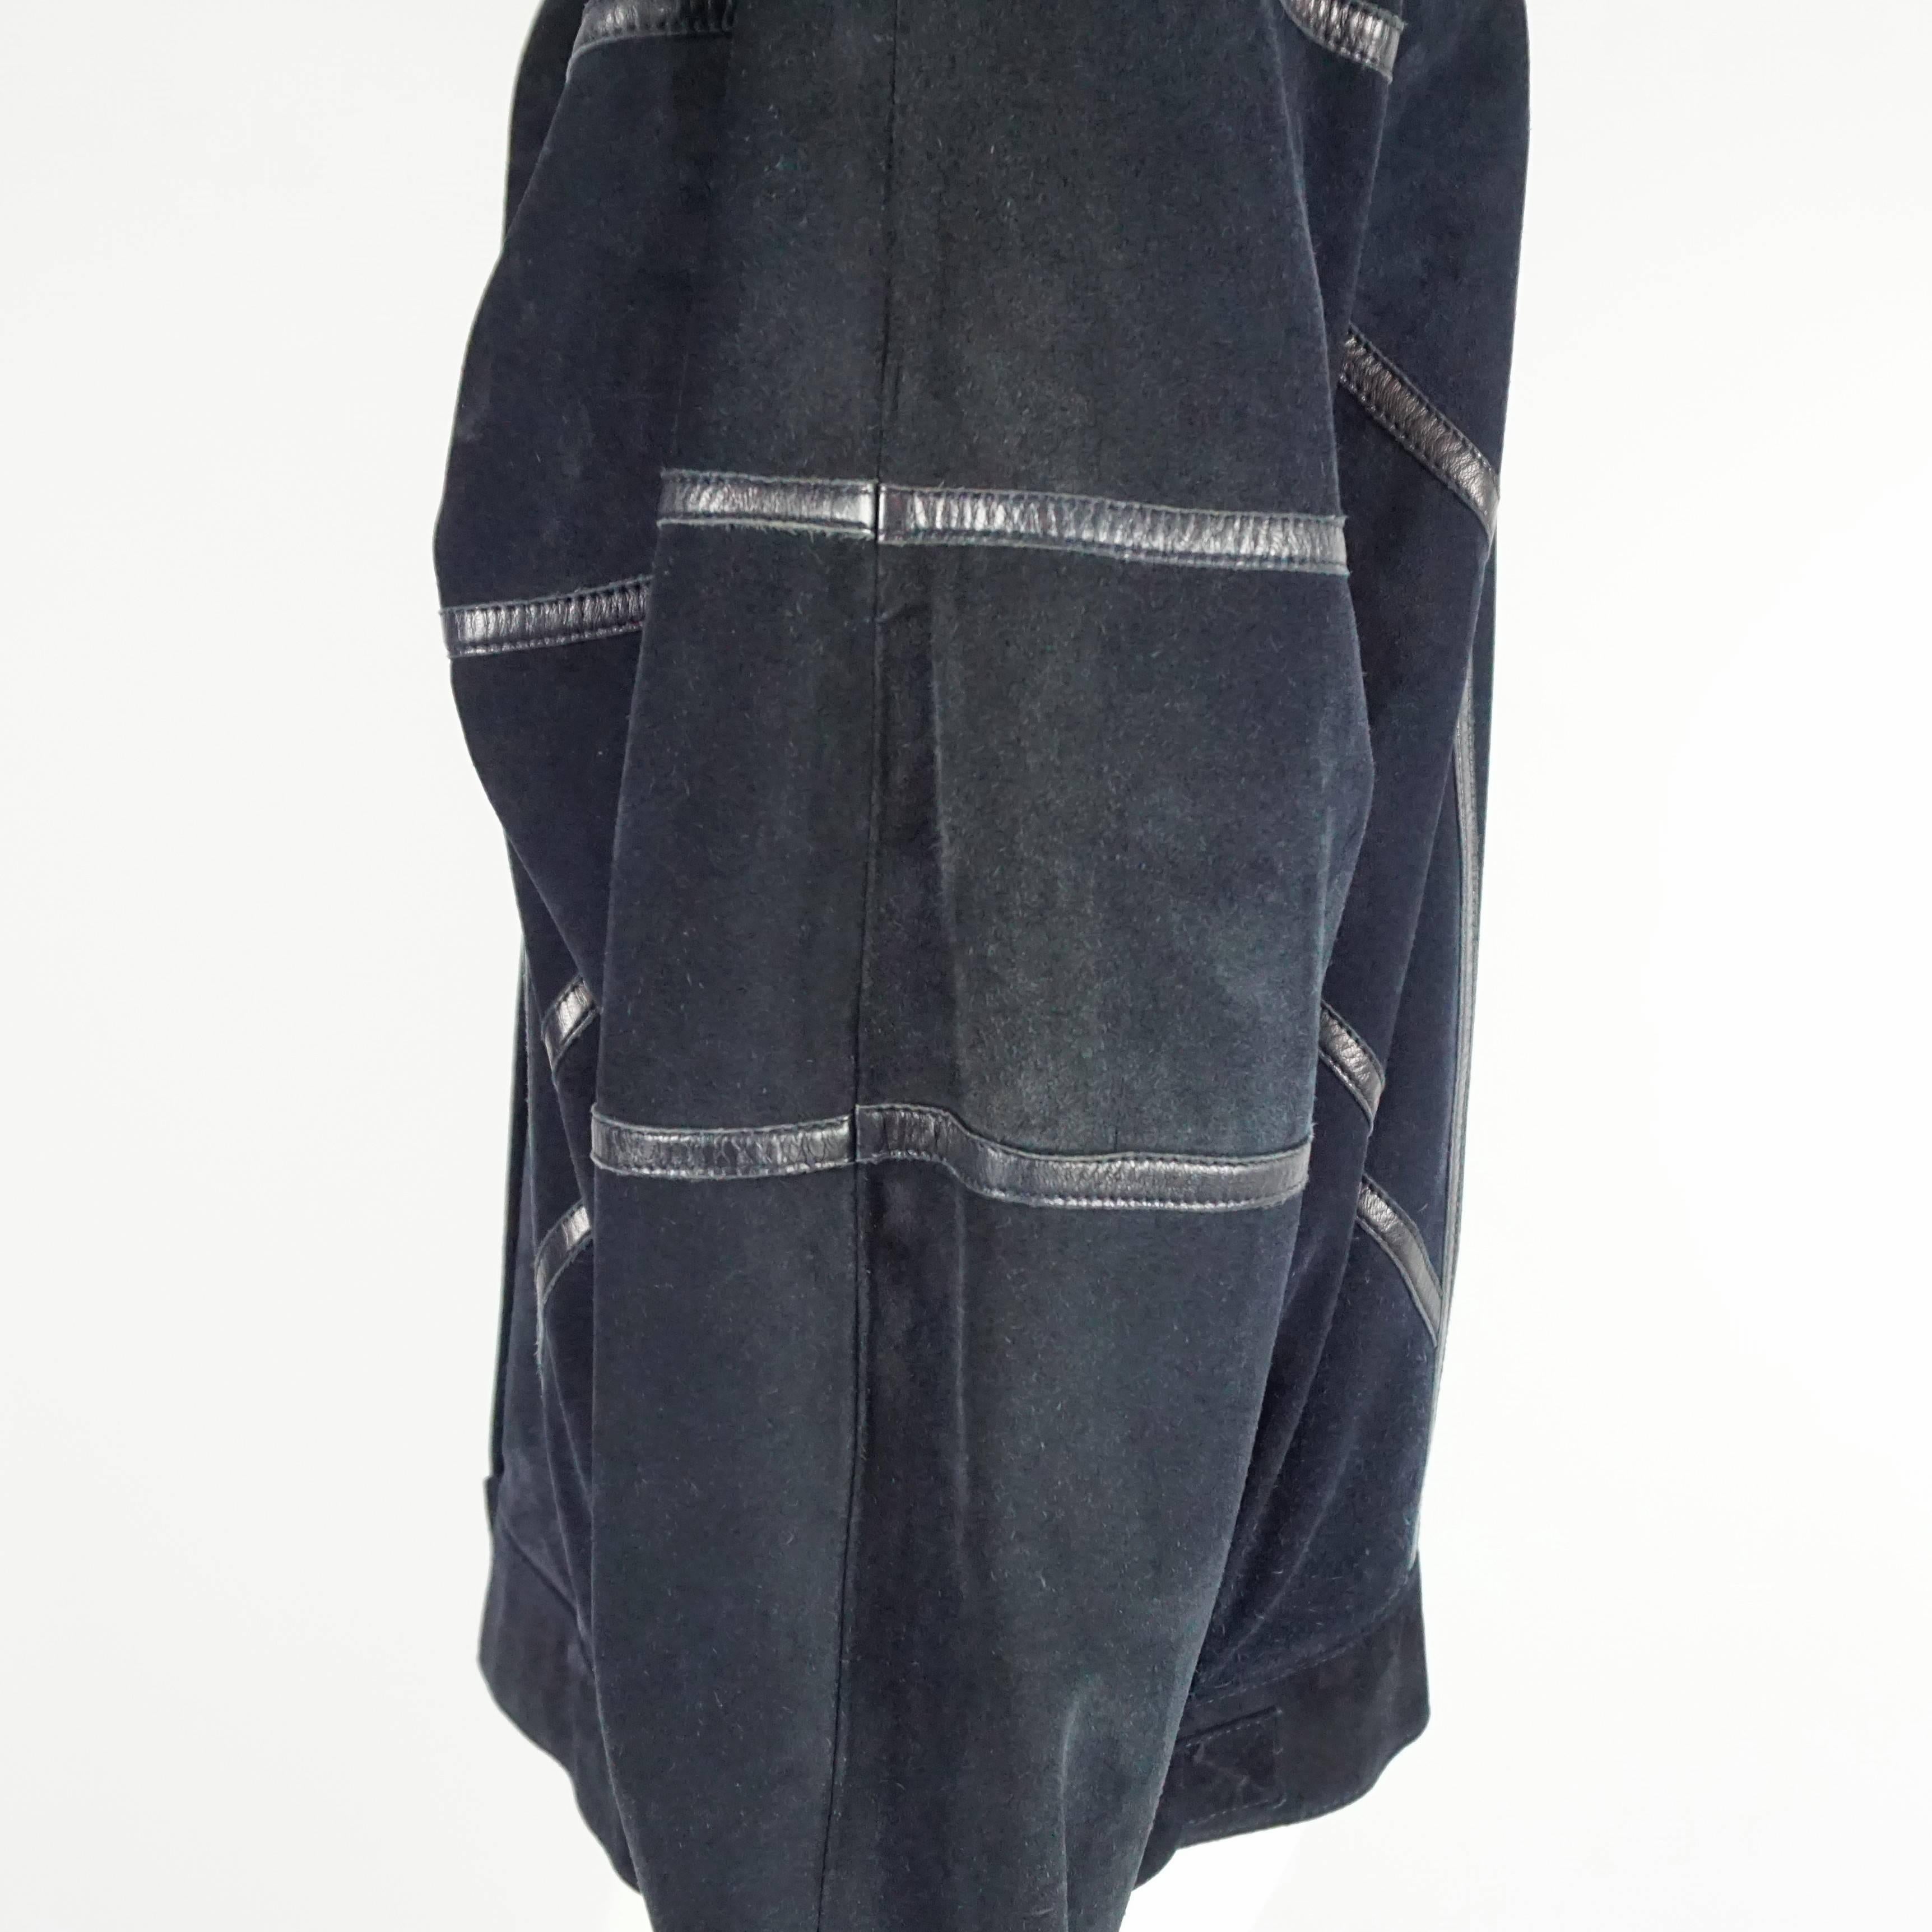 Celine Navy Suede and Leather Oversize Jacket - 42 - 1980s 4